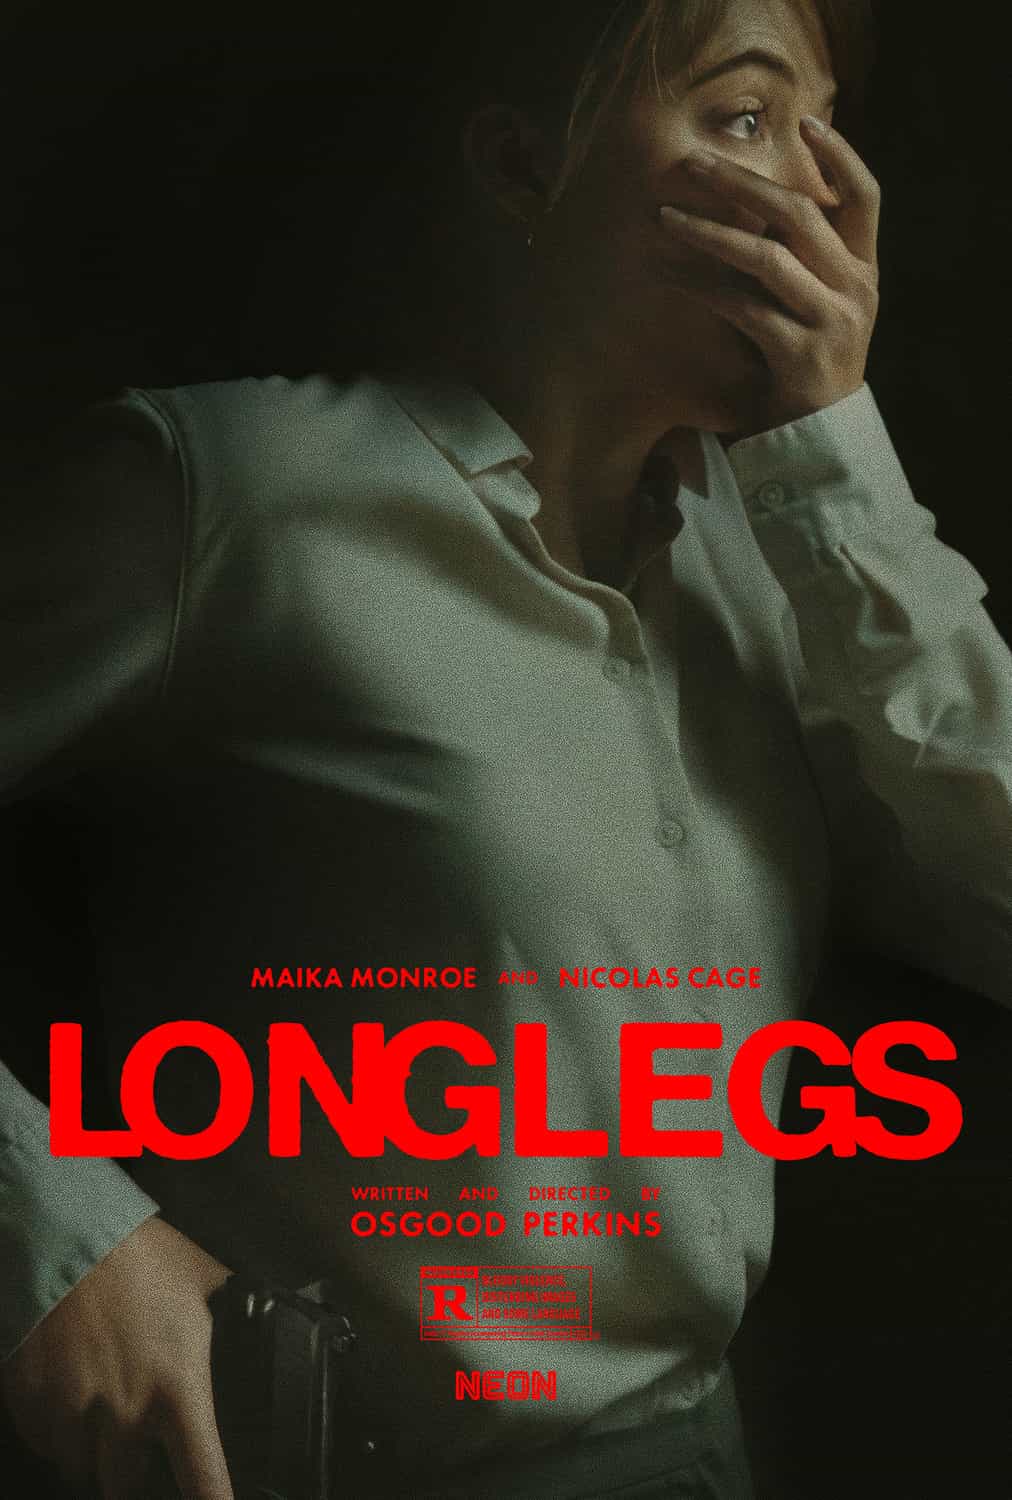 Longlegs is given a 15 age rating in the UK for strong violence, gore, threat, horror, language